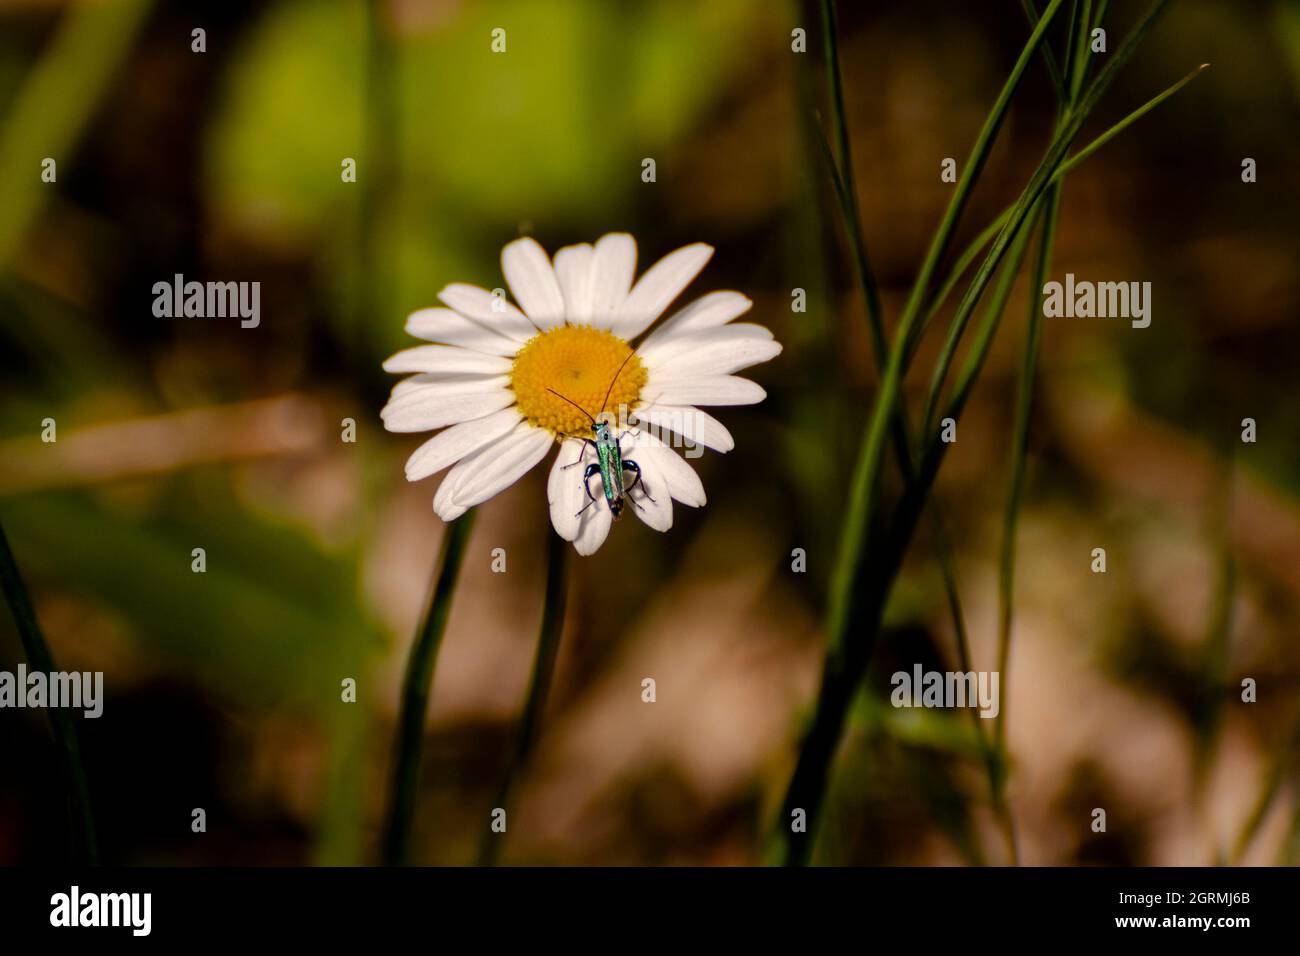 Cute beetle on top of a daisy Stock Photo